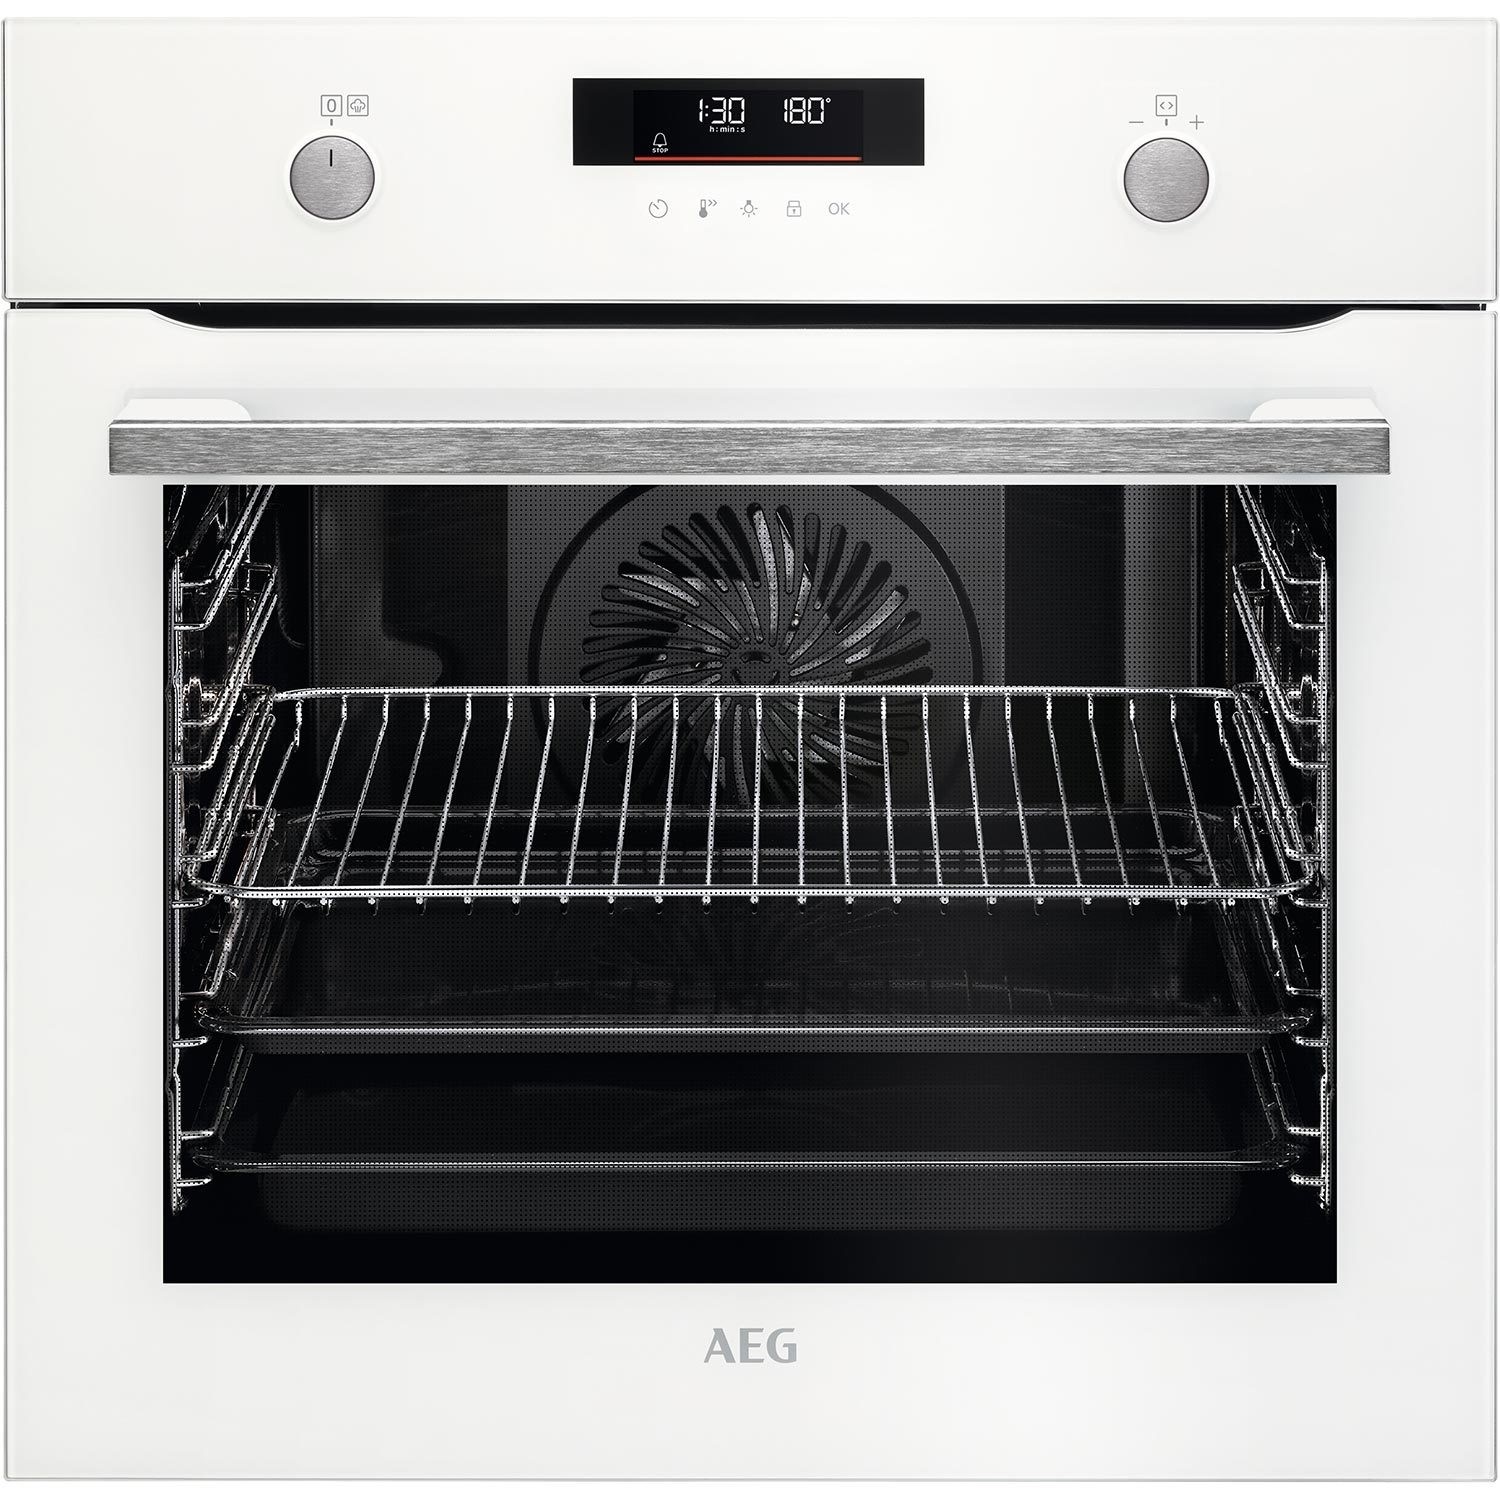 Photos - Other for Computer AEG 6000 SteamBake Electric Single Oven - White BPS555060W 